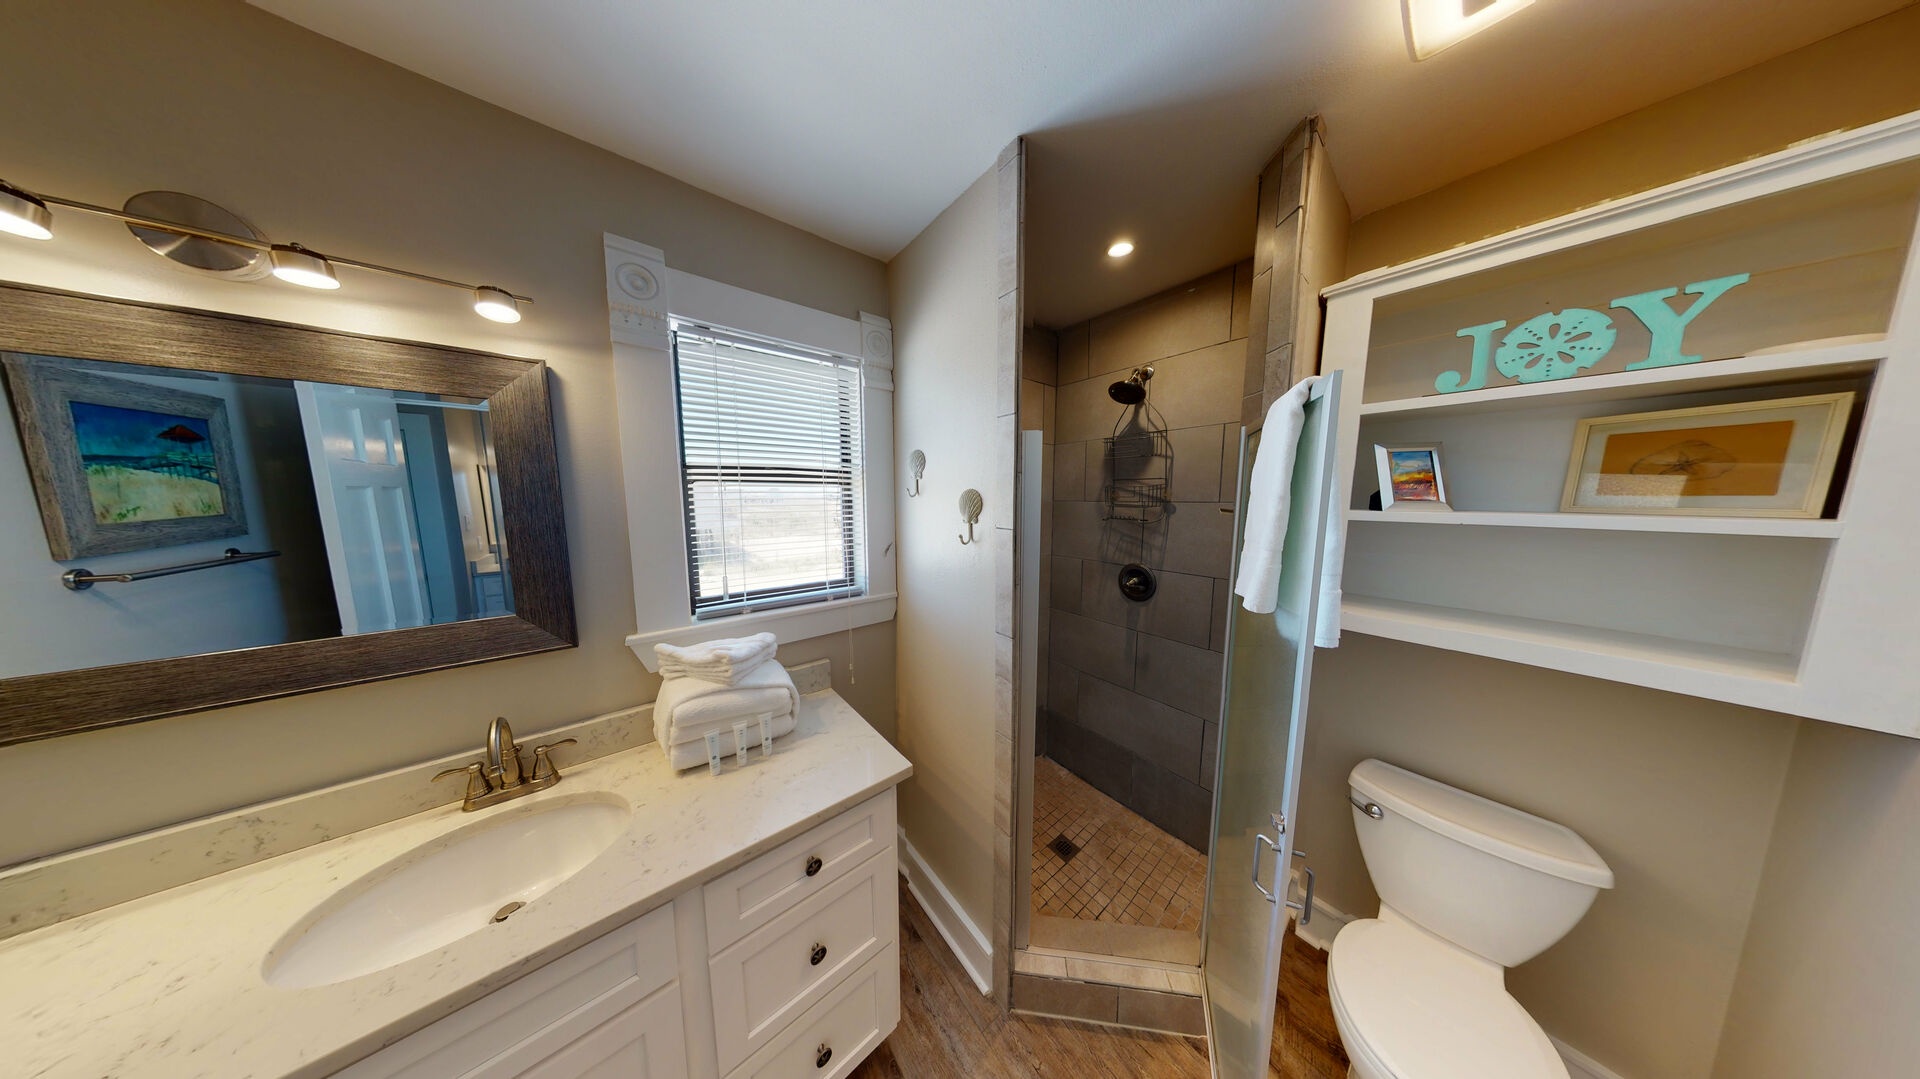 Large open master bath with laundry room and walk-in shower